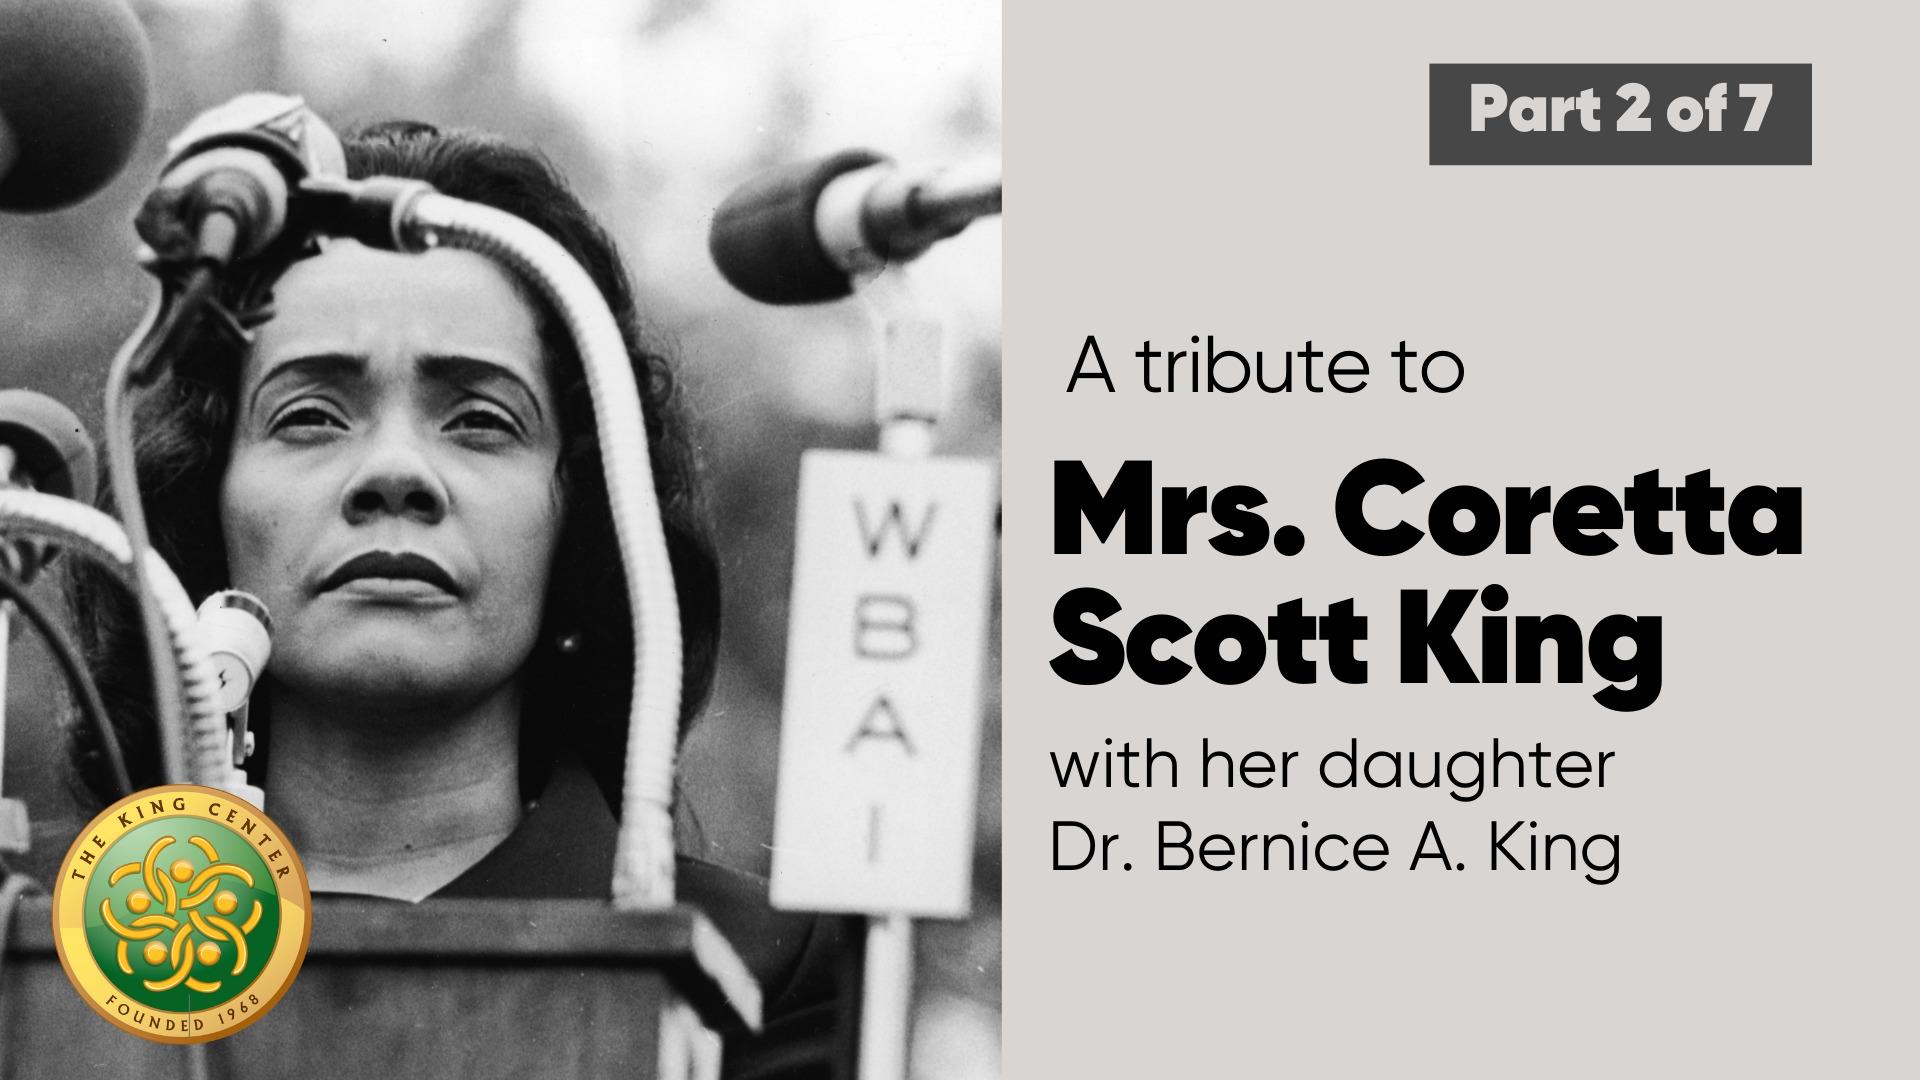 A tribute to Mrs. Coretta Scott King with her daughter Dr. Bernice A. King- Part 2 of 7